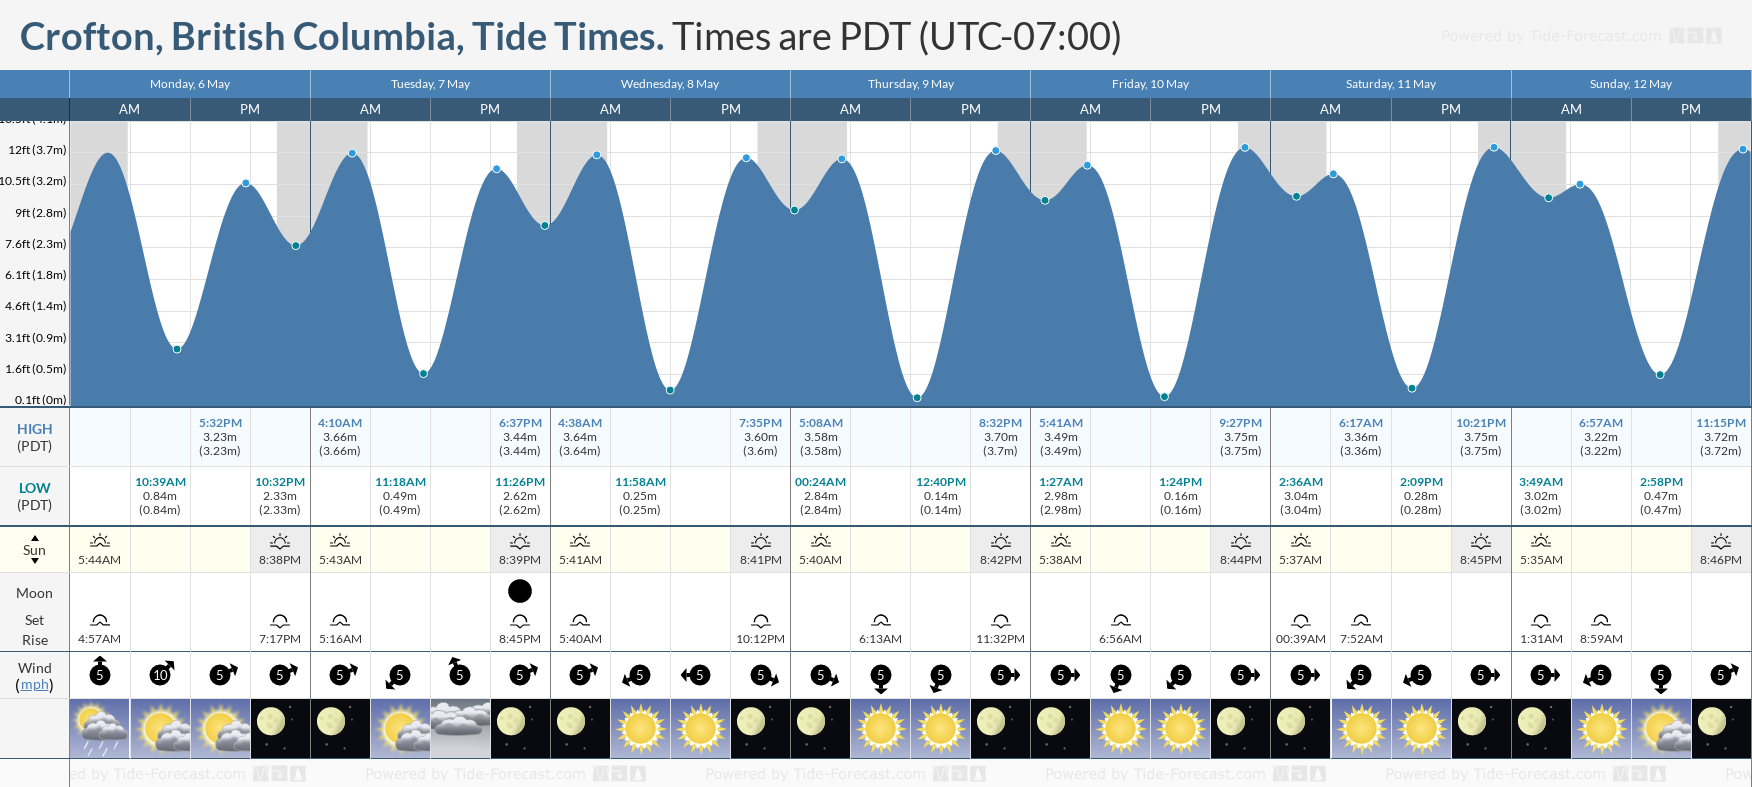 Crofton, British Columbia Tide Chart including high and low tide tide times for the next 7 days